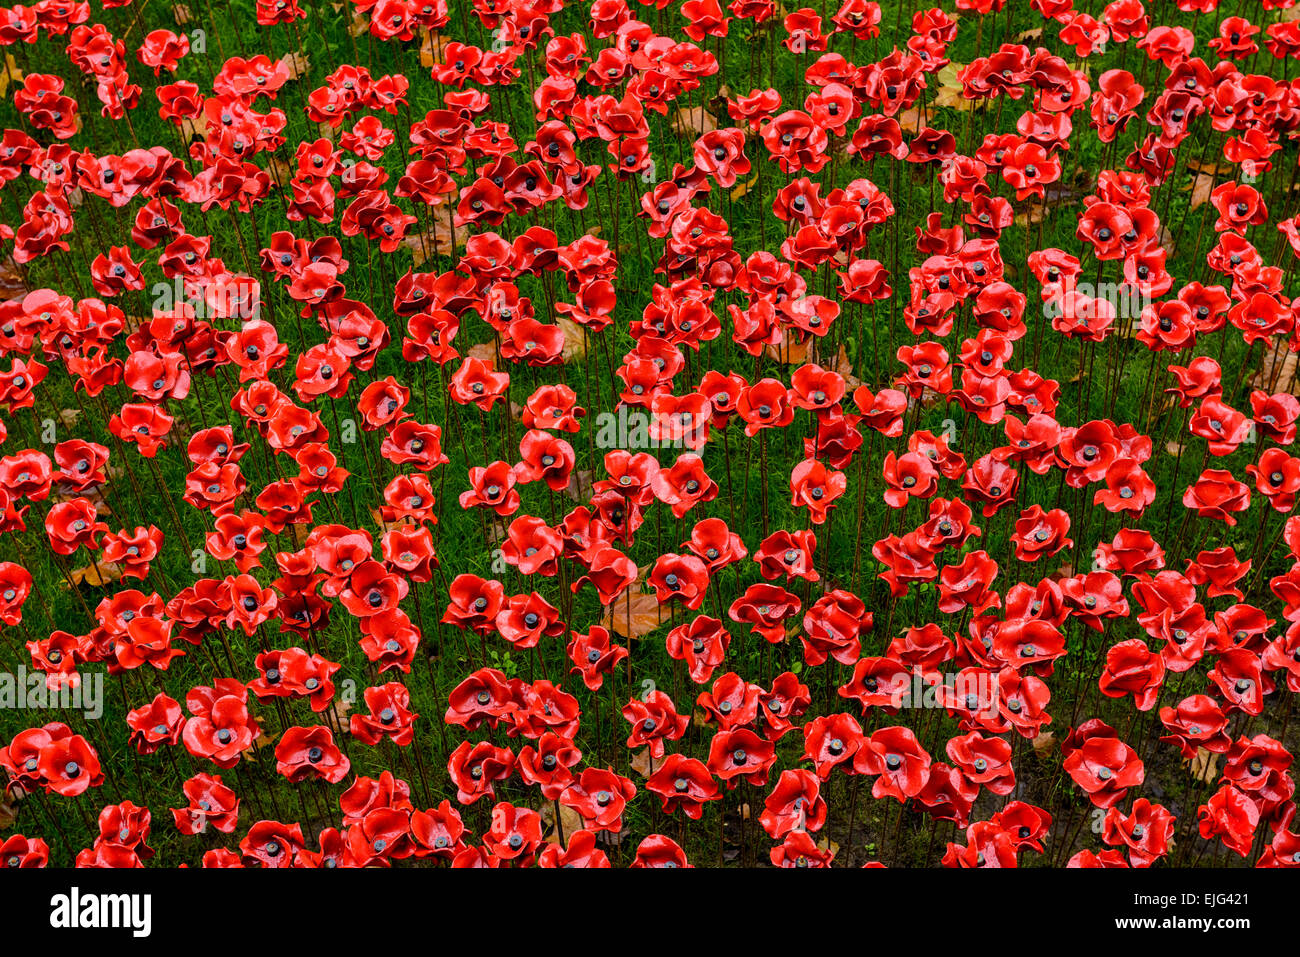 Ceramic red Poppies (designed by Paul Cummins) installed at The Tower of London as a war memorial, UK Stock Photo